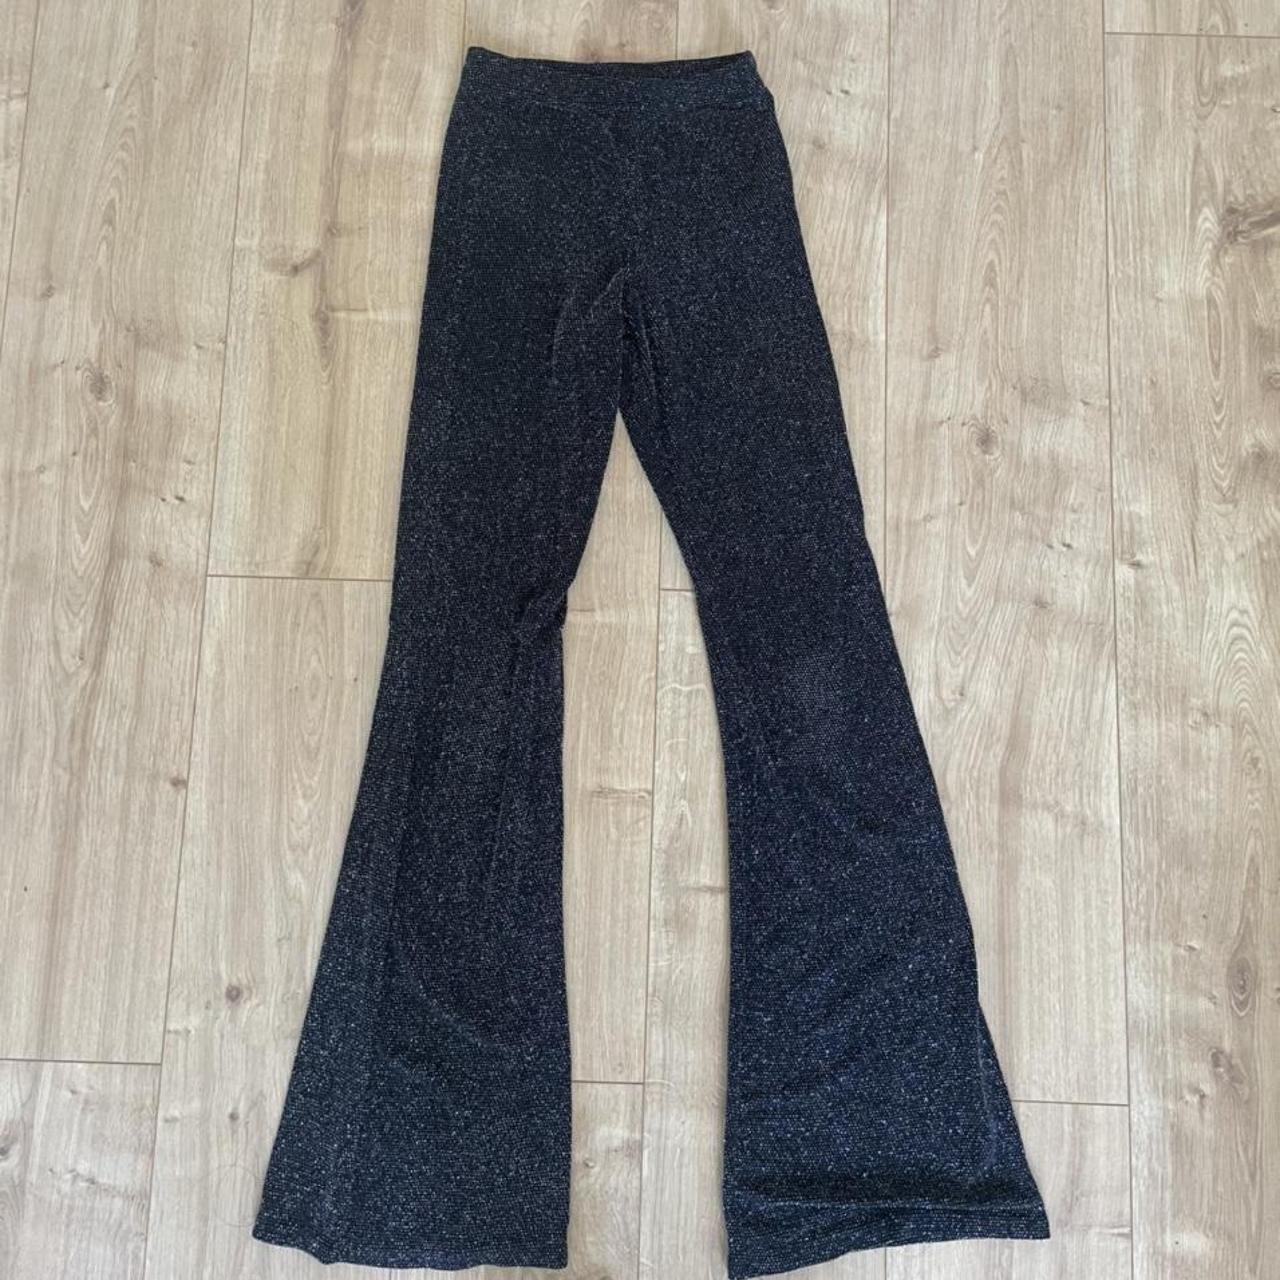 Black Glitter Flares Great condition (hardly... - Depop